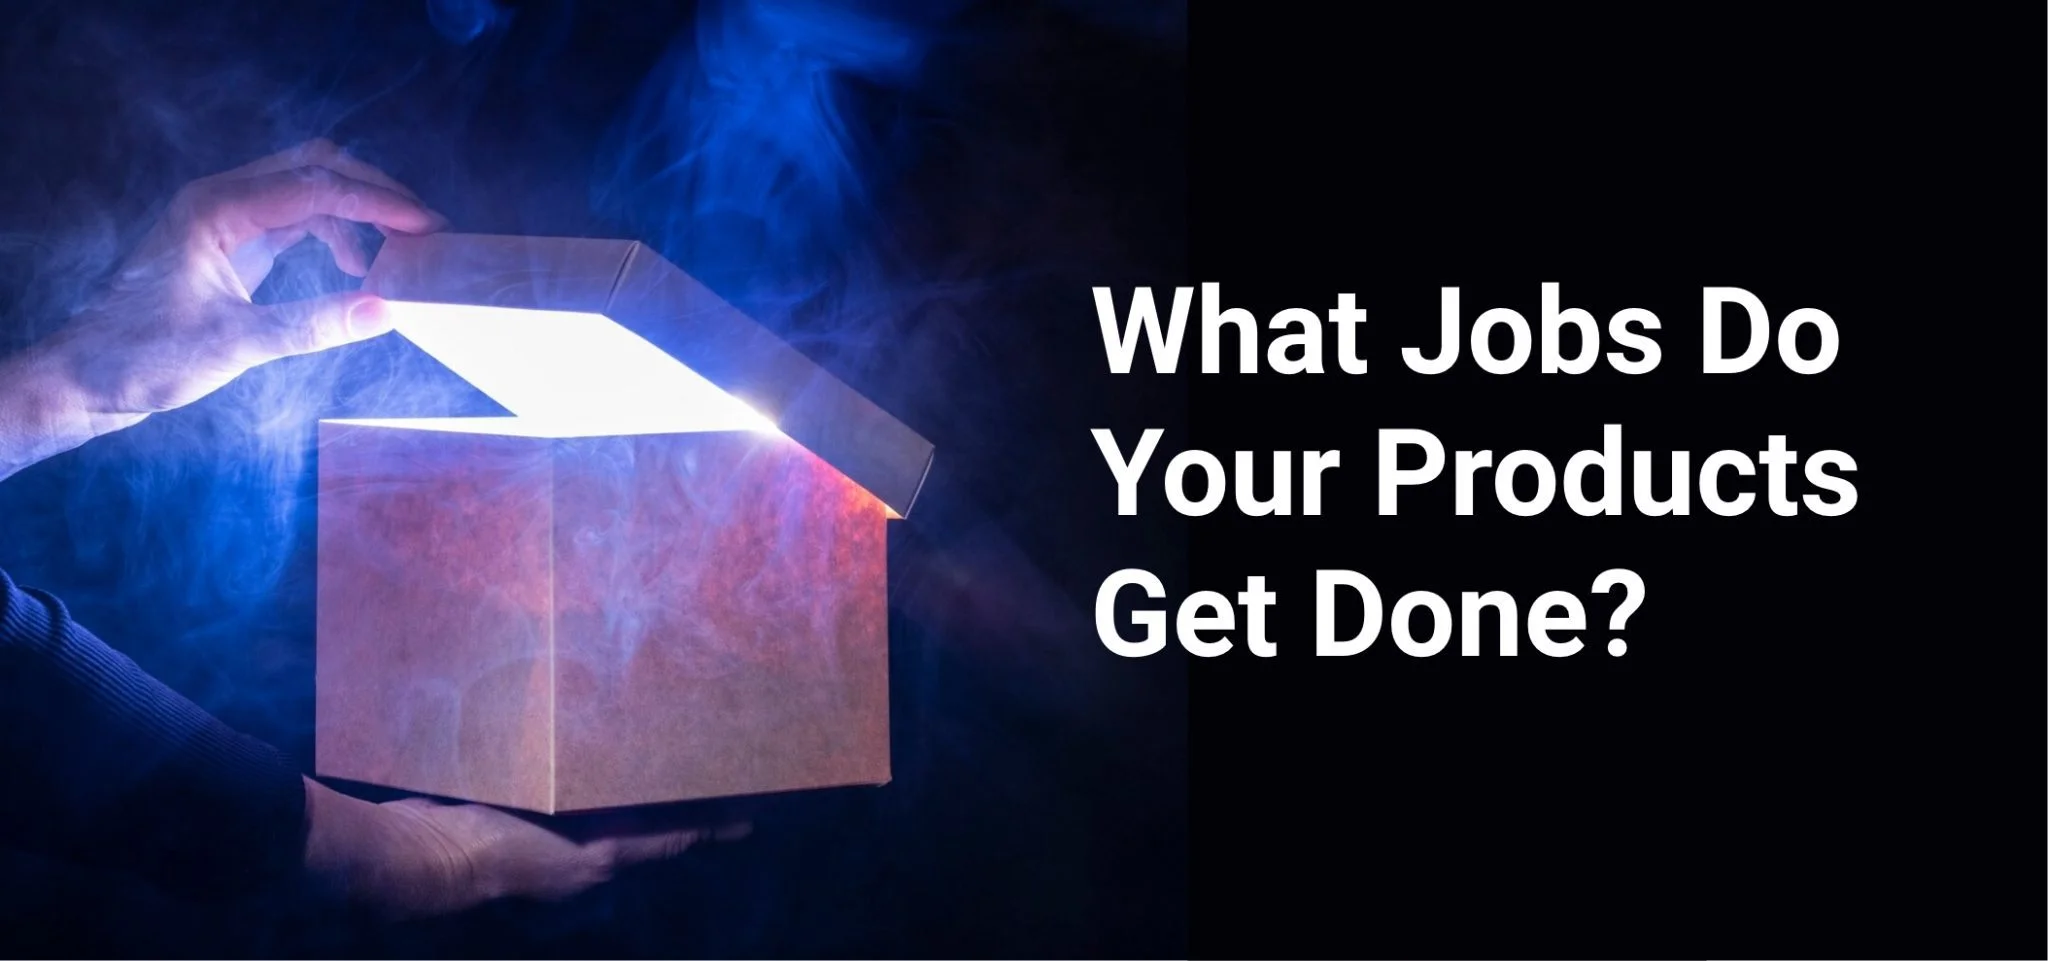 What Jobs Do Your Products Get Done?